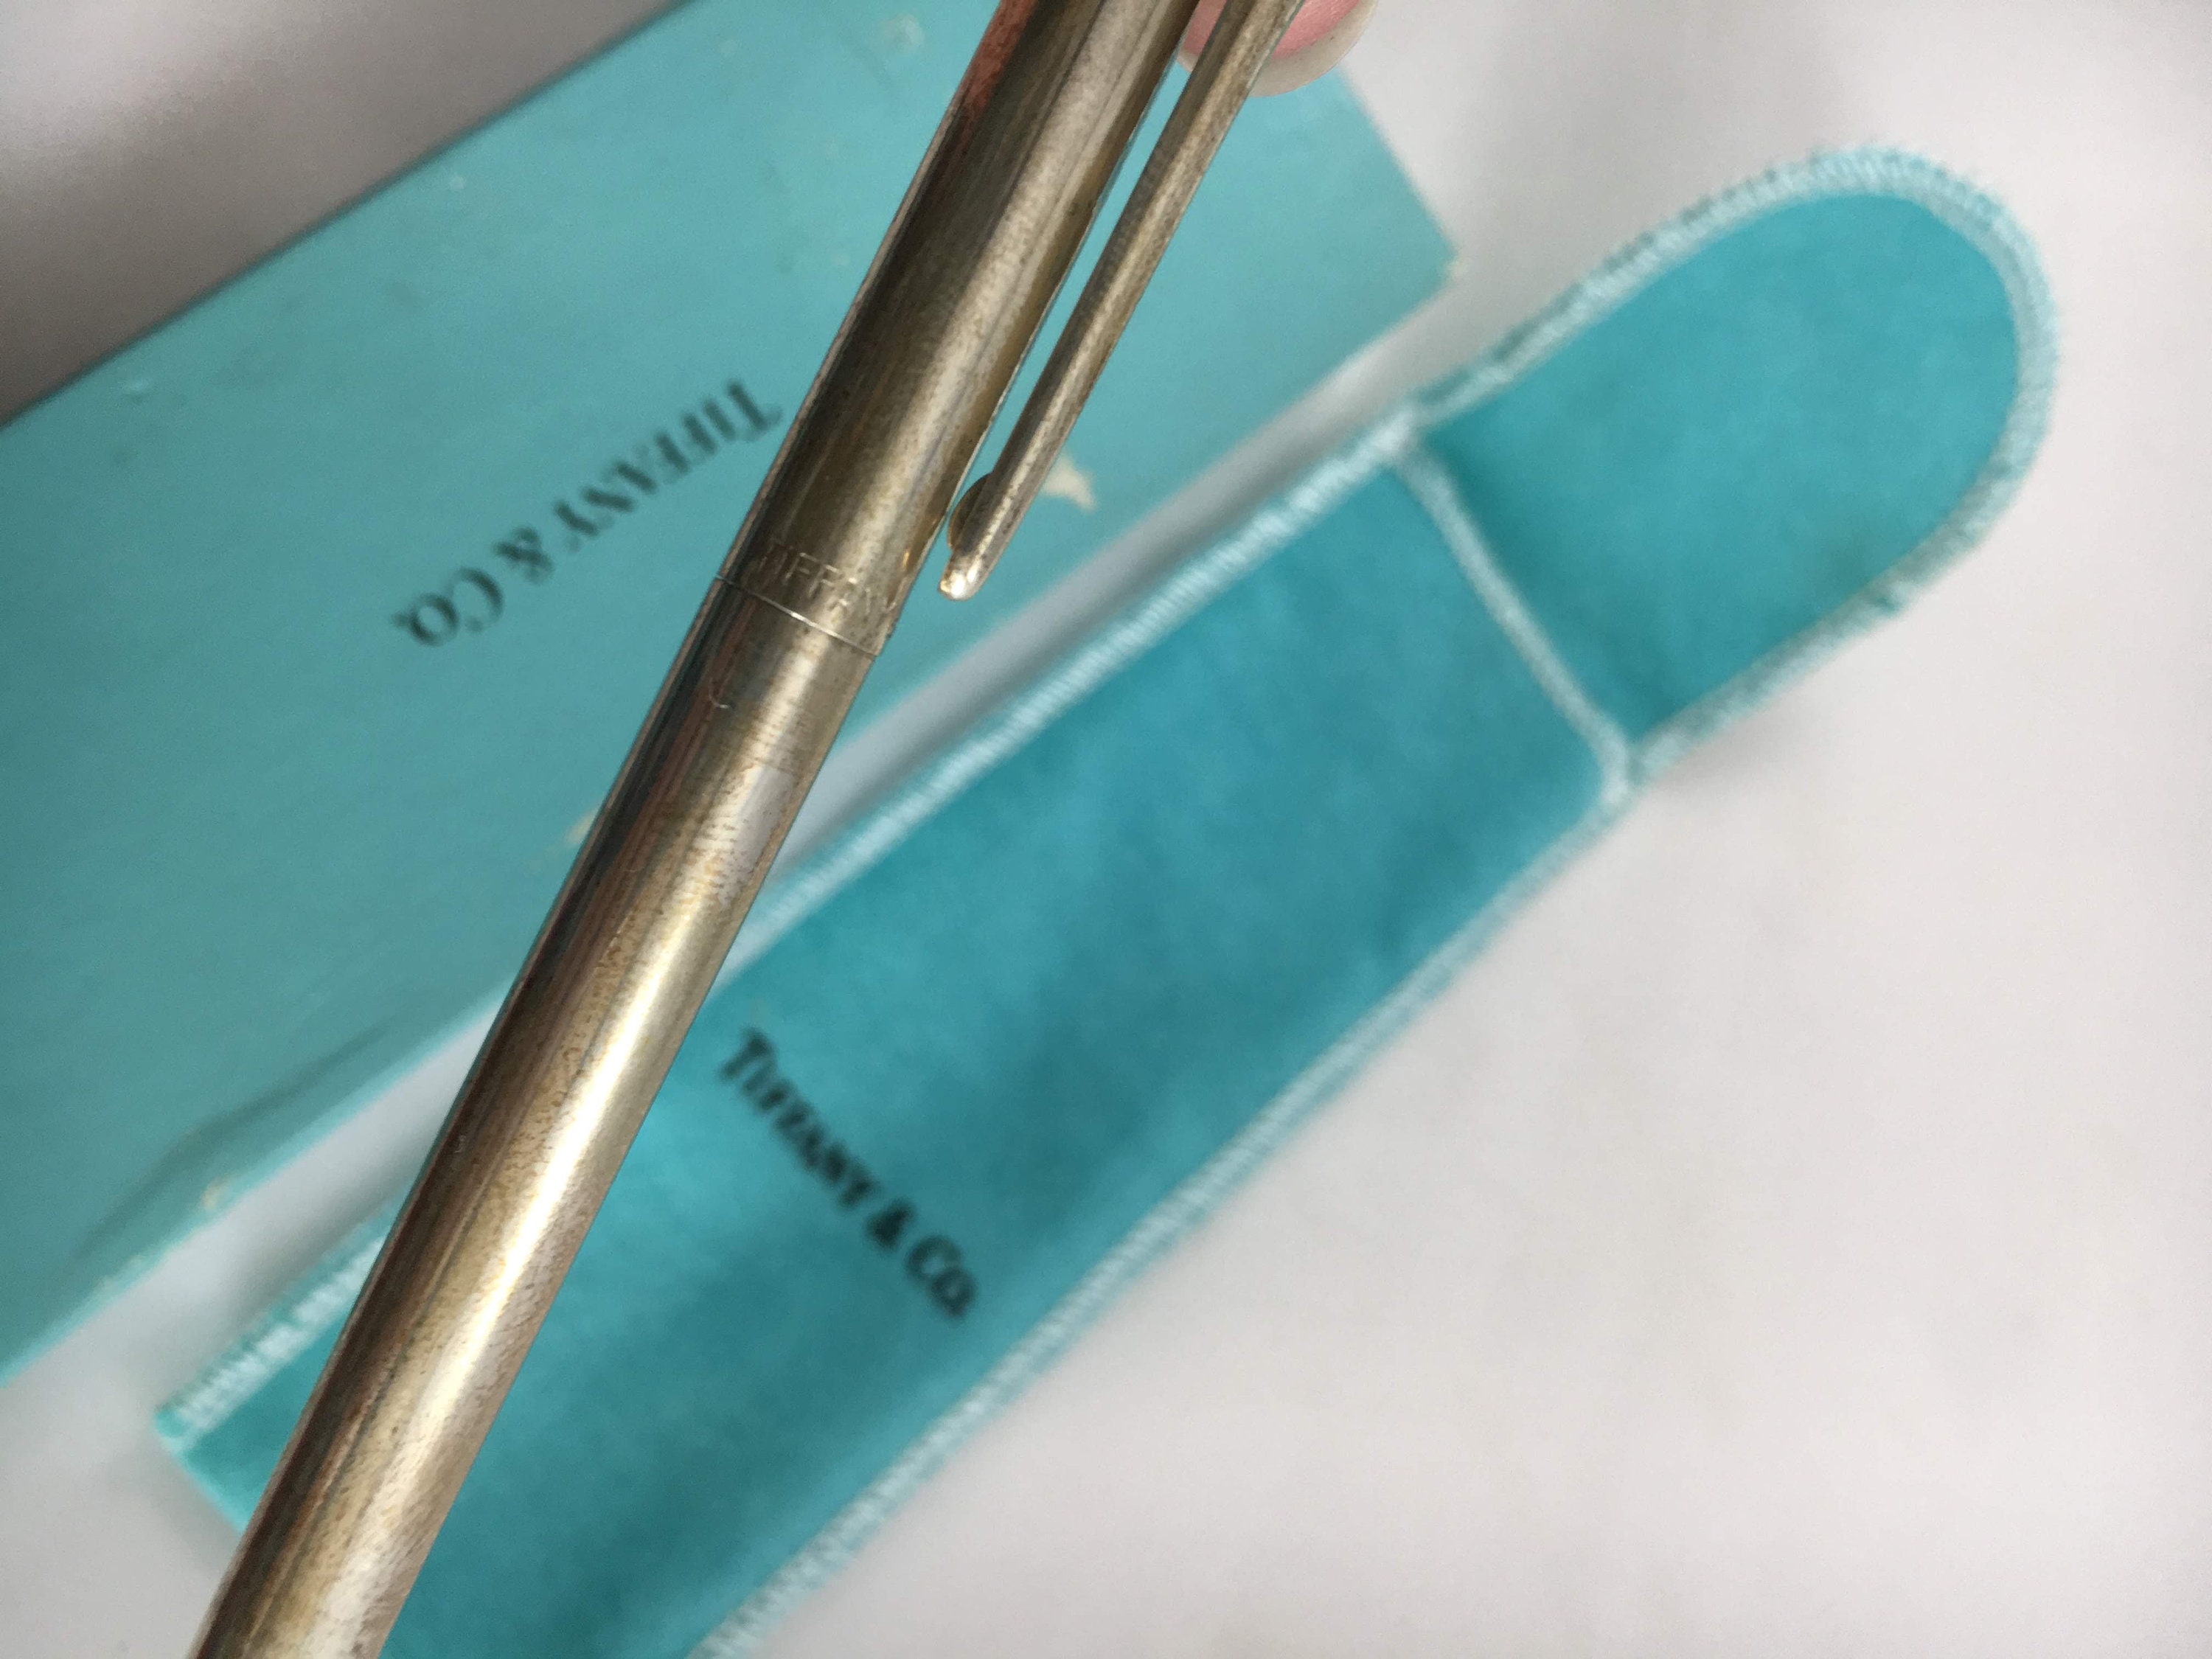 Tiffany & Co. sterling silver pen in original box and felt pouch